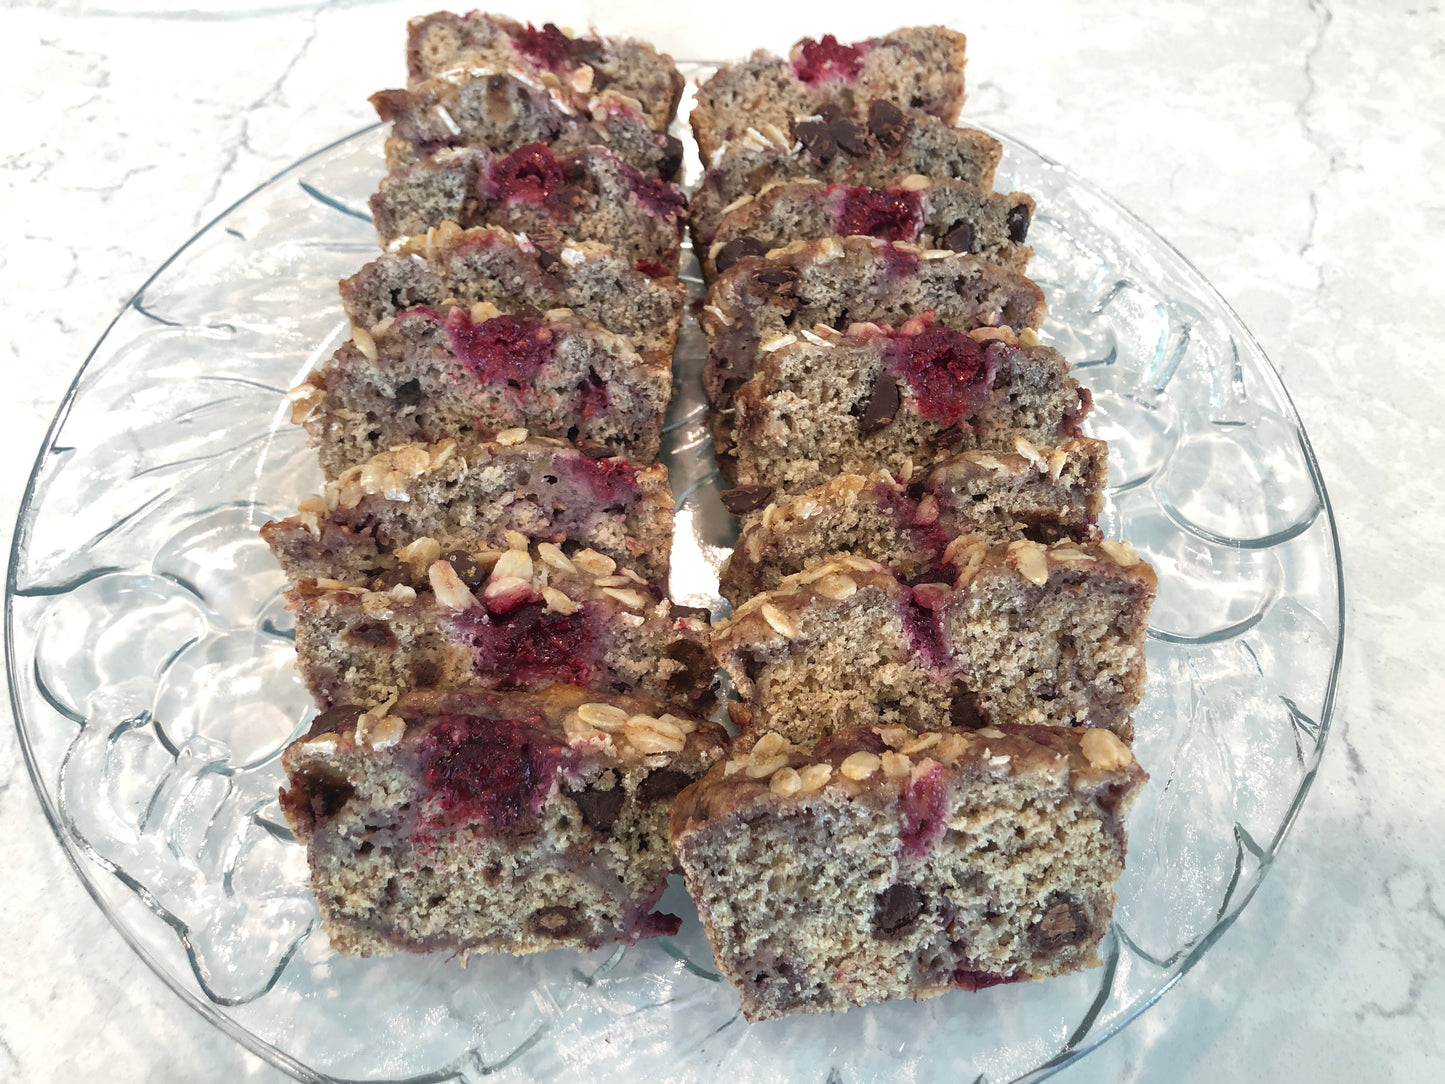 A platter with two loaves of sliced Oatmeal Banana Raspberry Chocolate Chip Bread